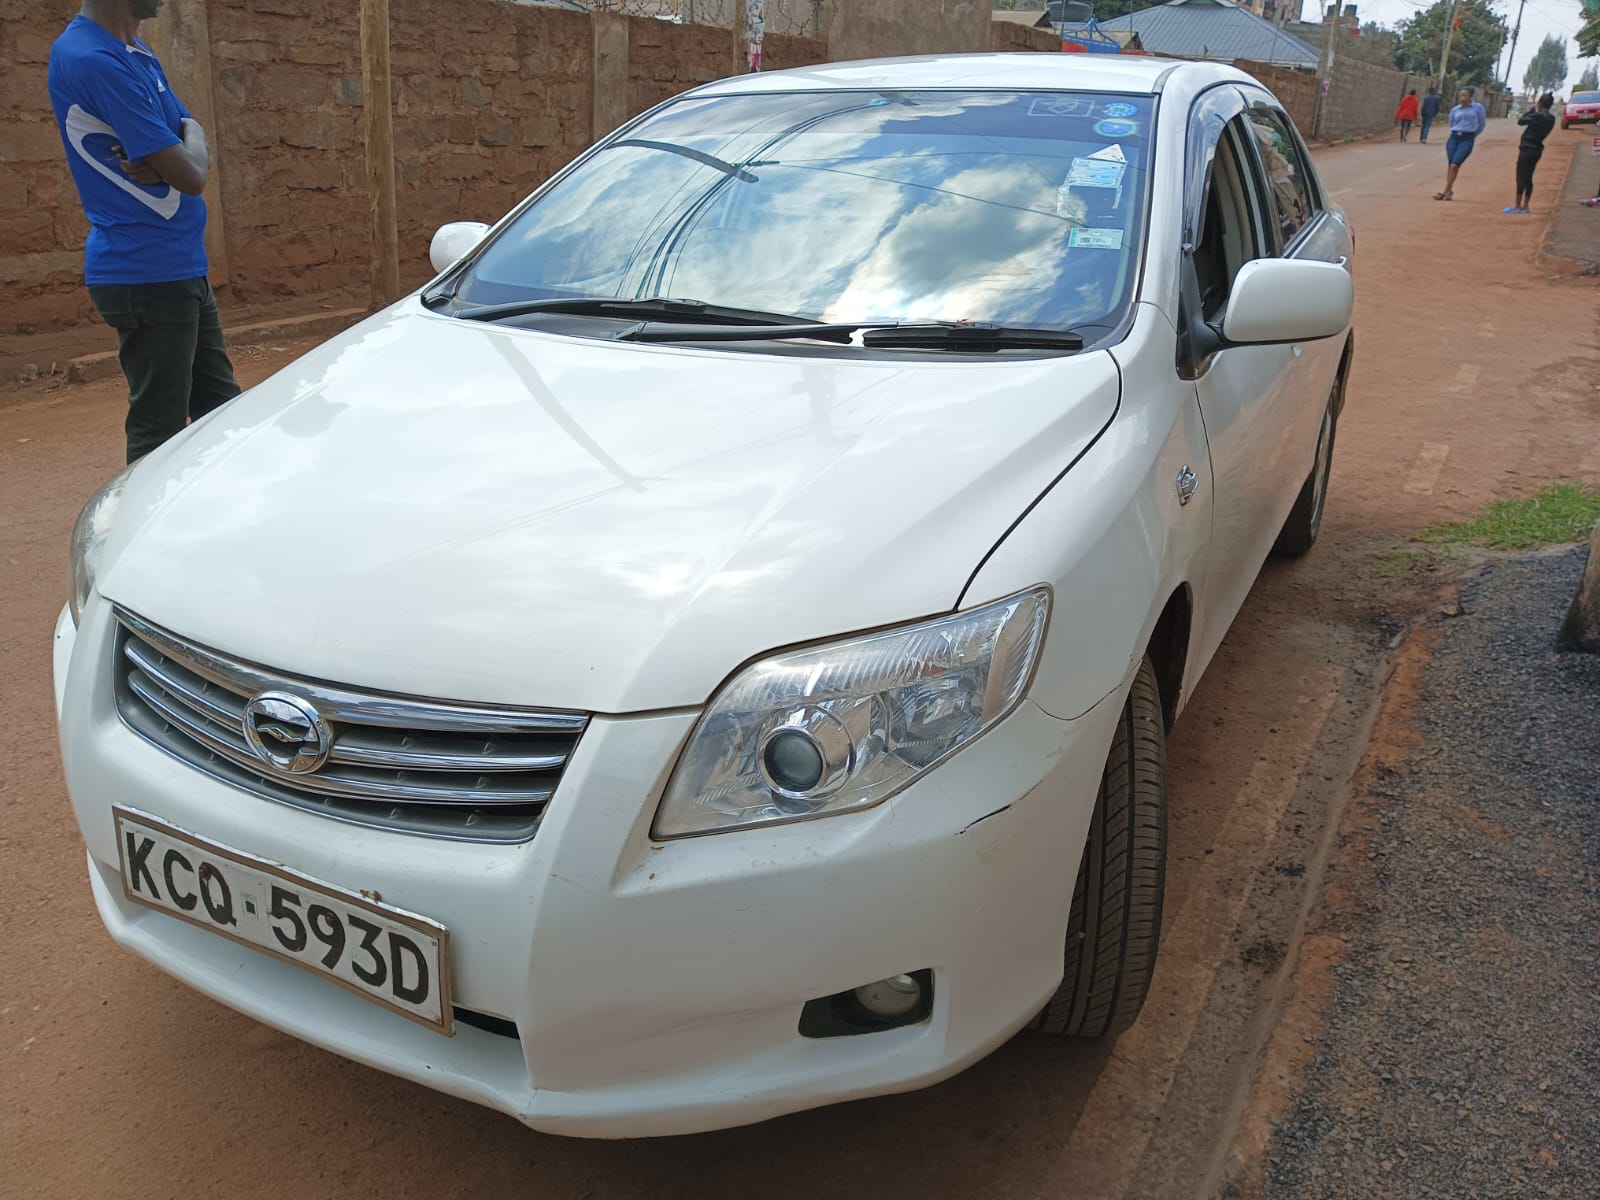 Toyota AXIO 2010 pay Deposit Trade in Ok Hot Deal